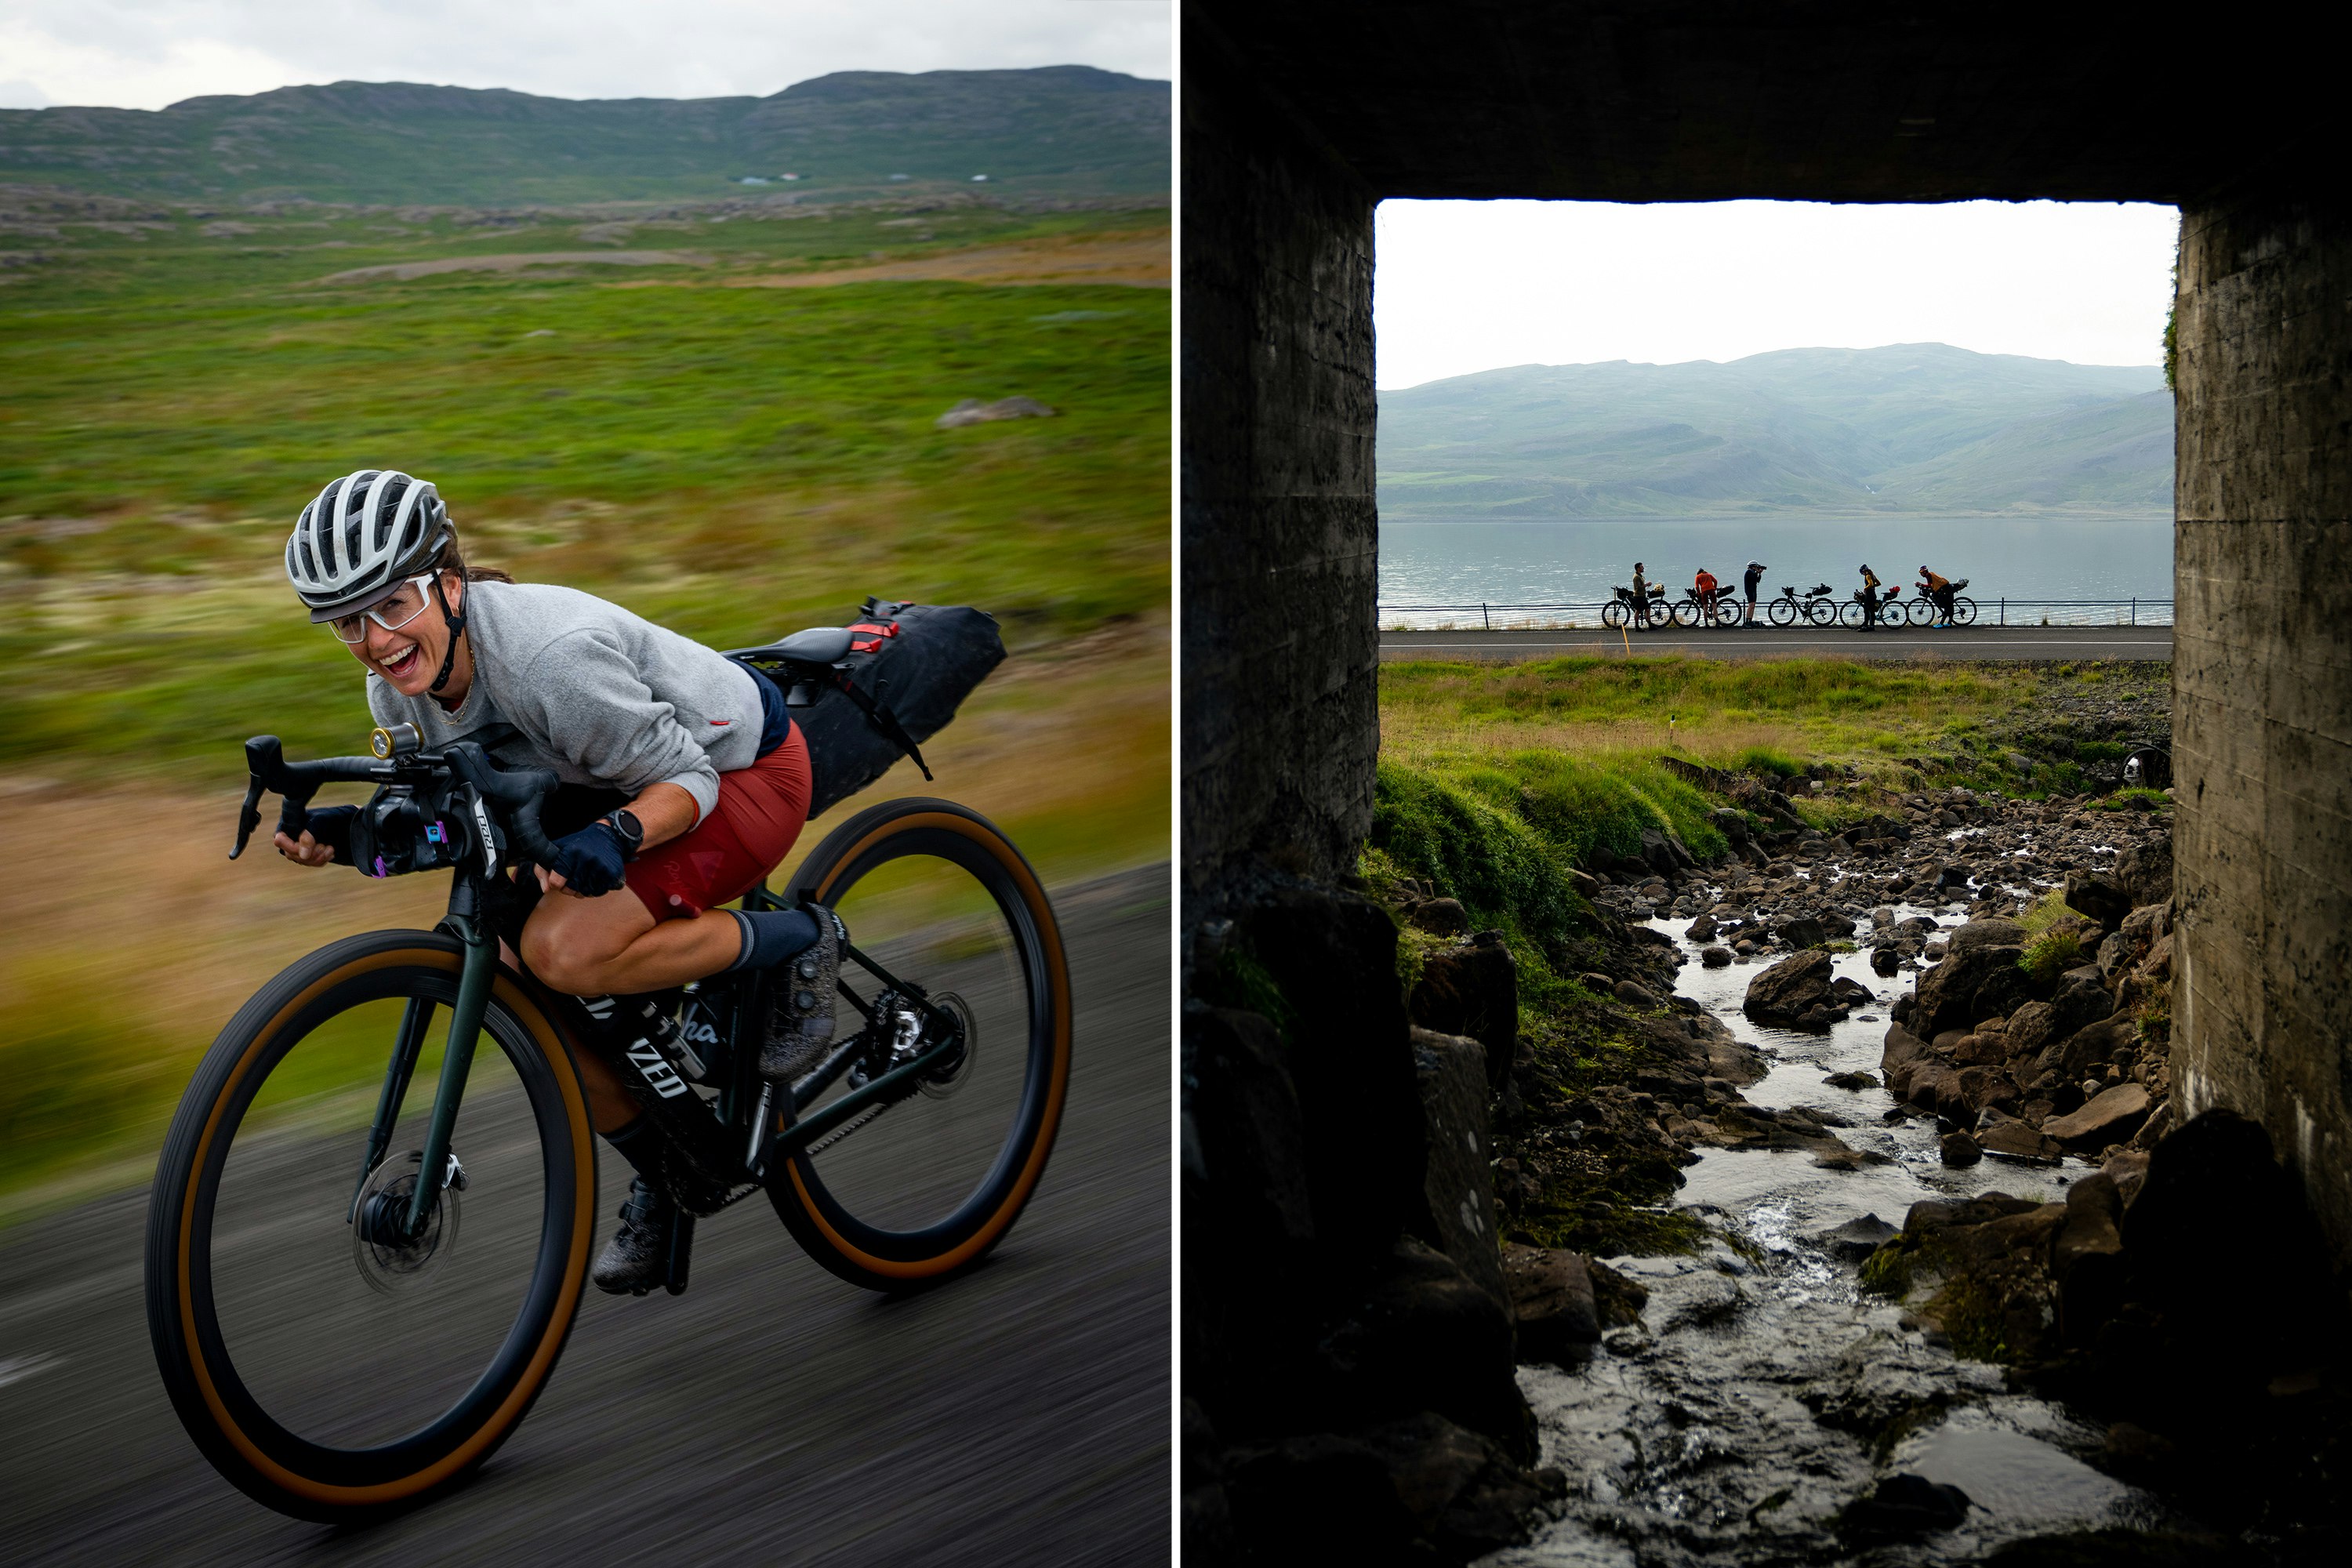 Lael Wilcox crouches on her bike to speed through a downhill section; the group poses at the end of a tunnel.